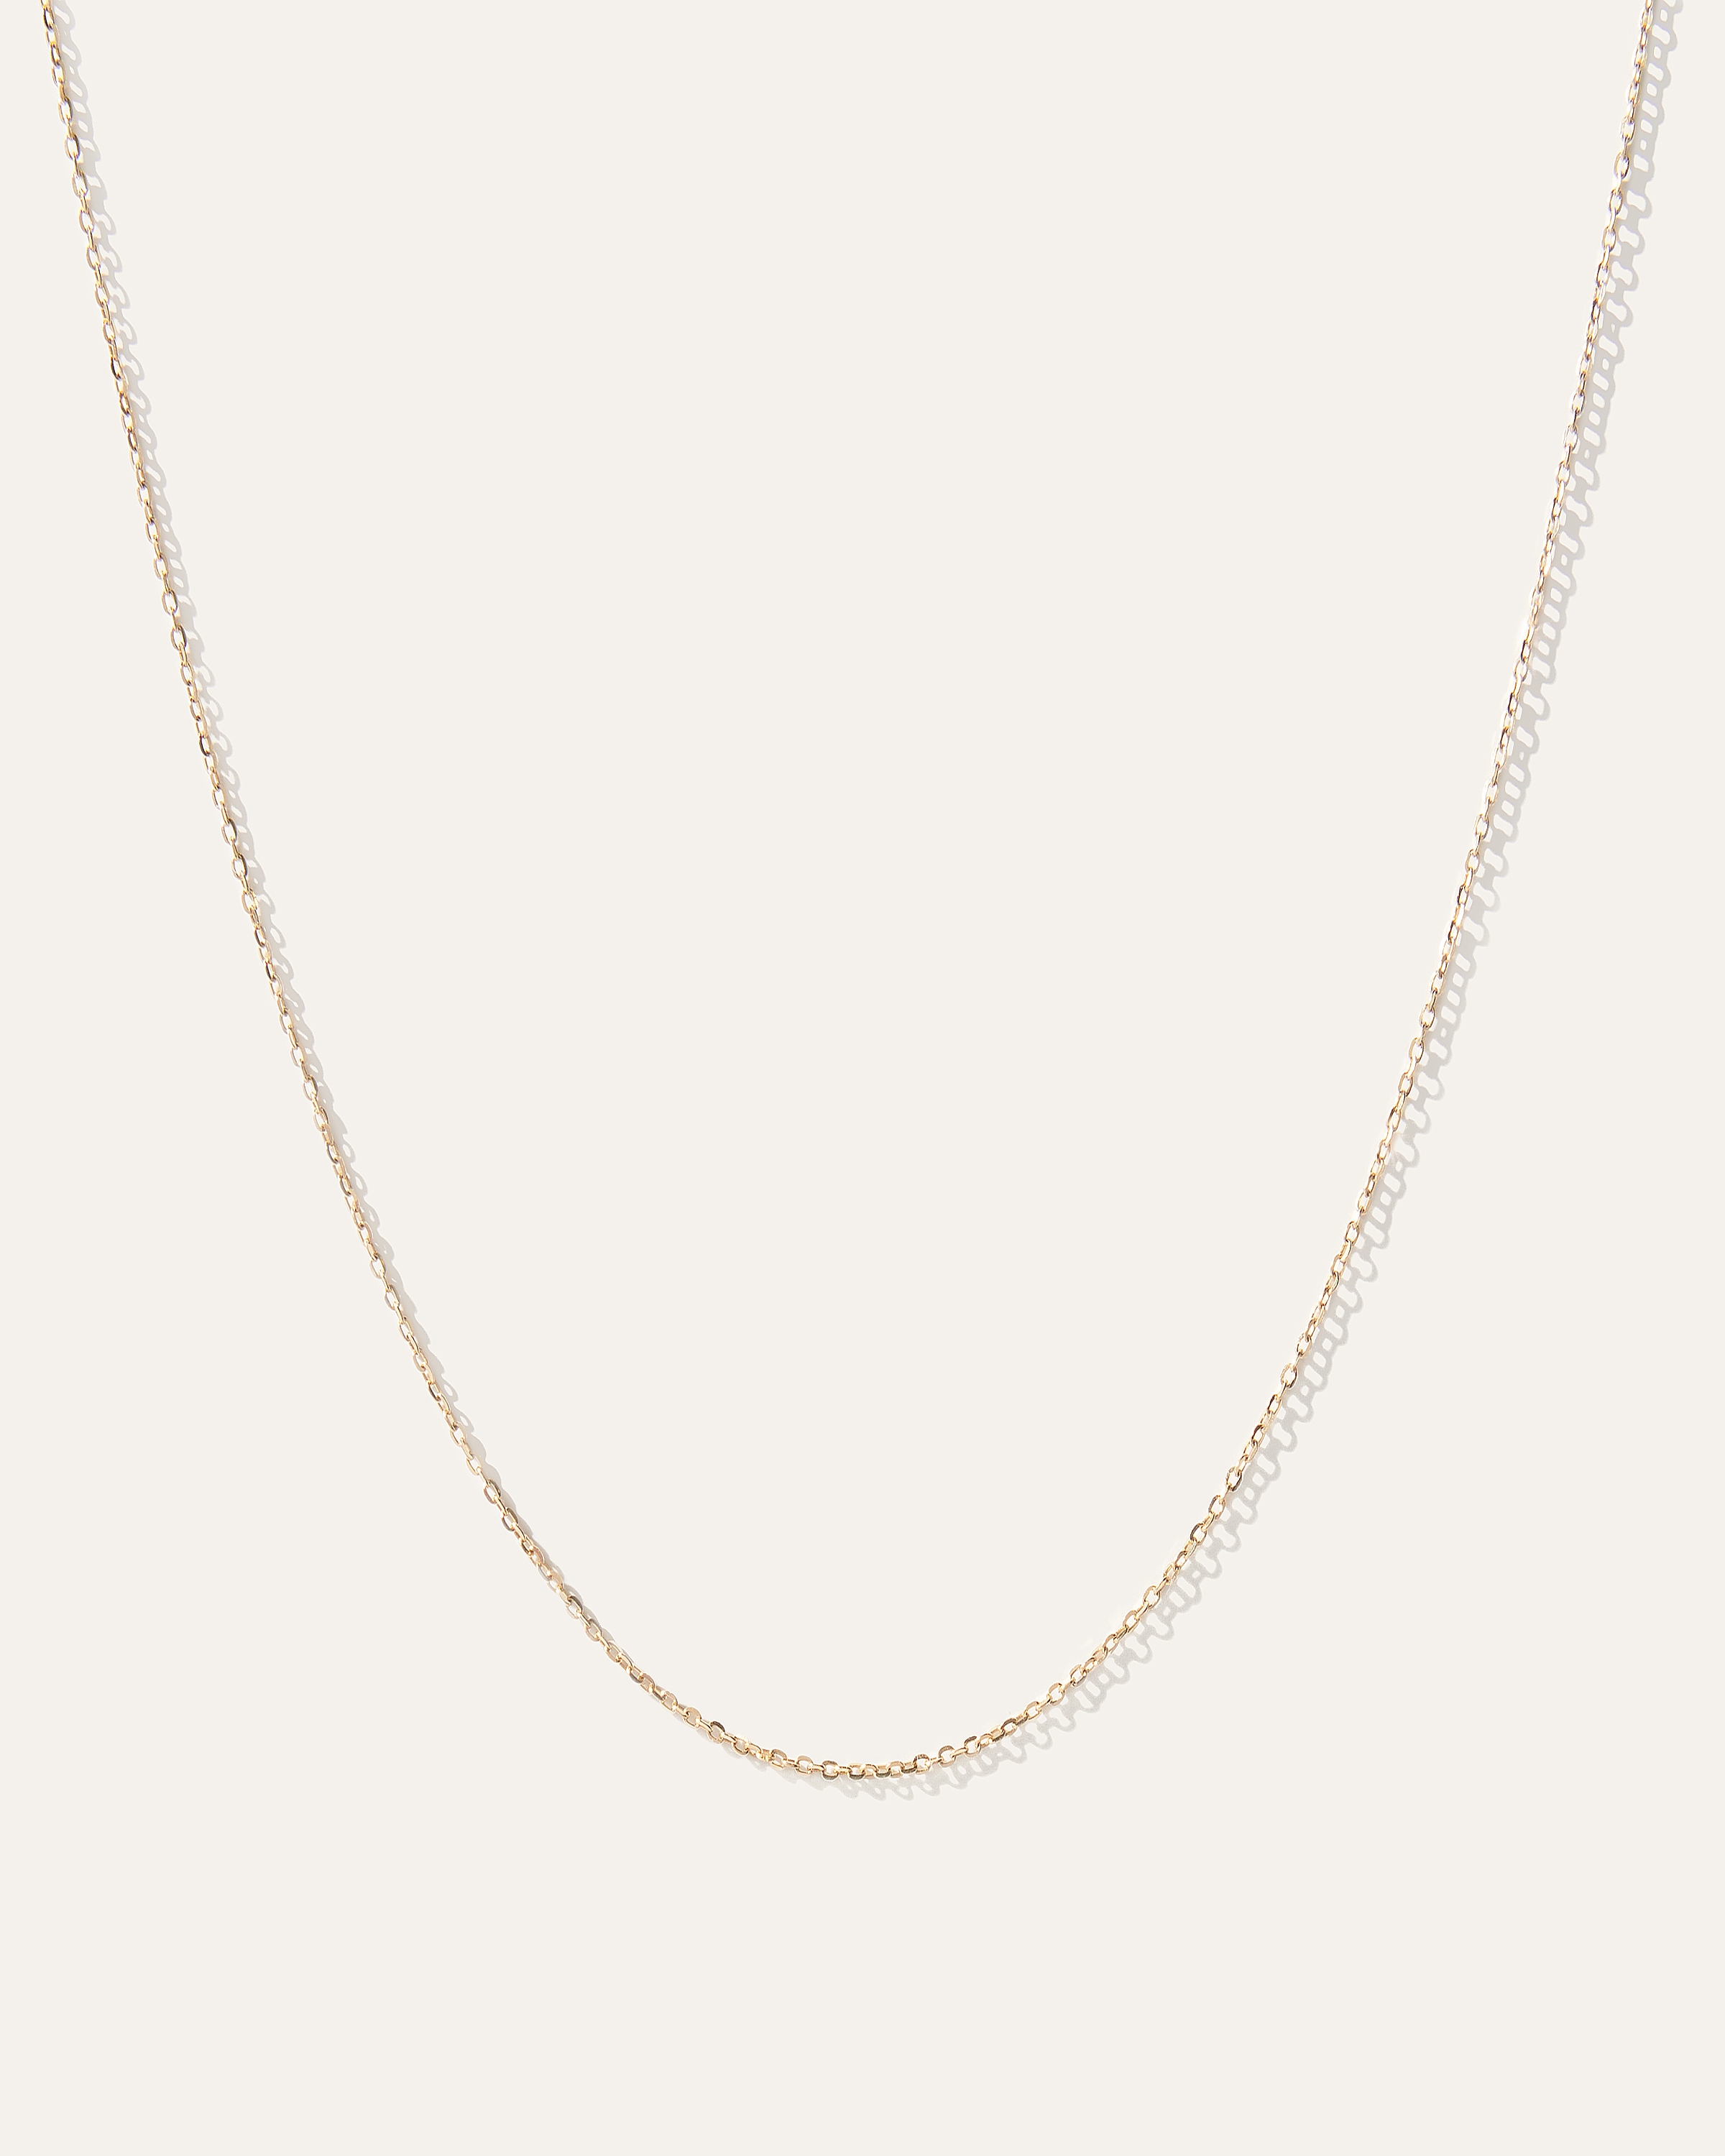 Quince Women's 14k Gold Petite Cable Chain